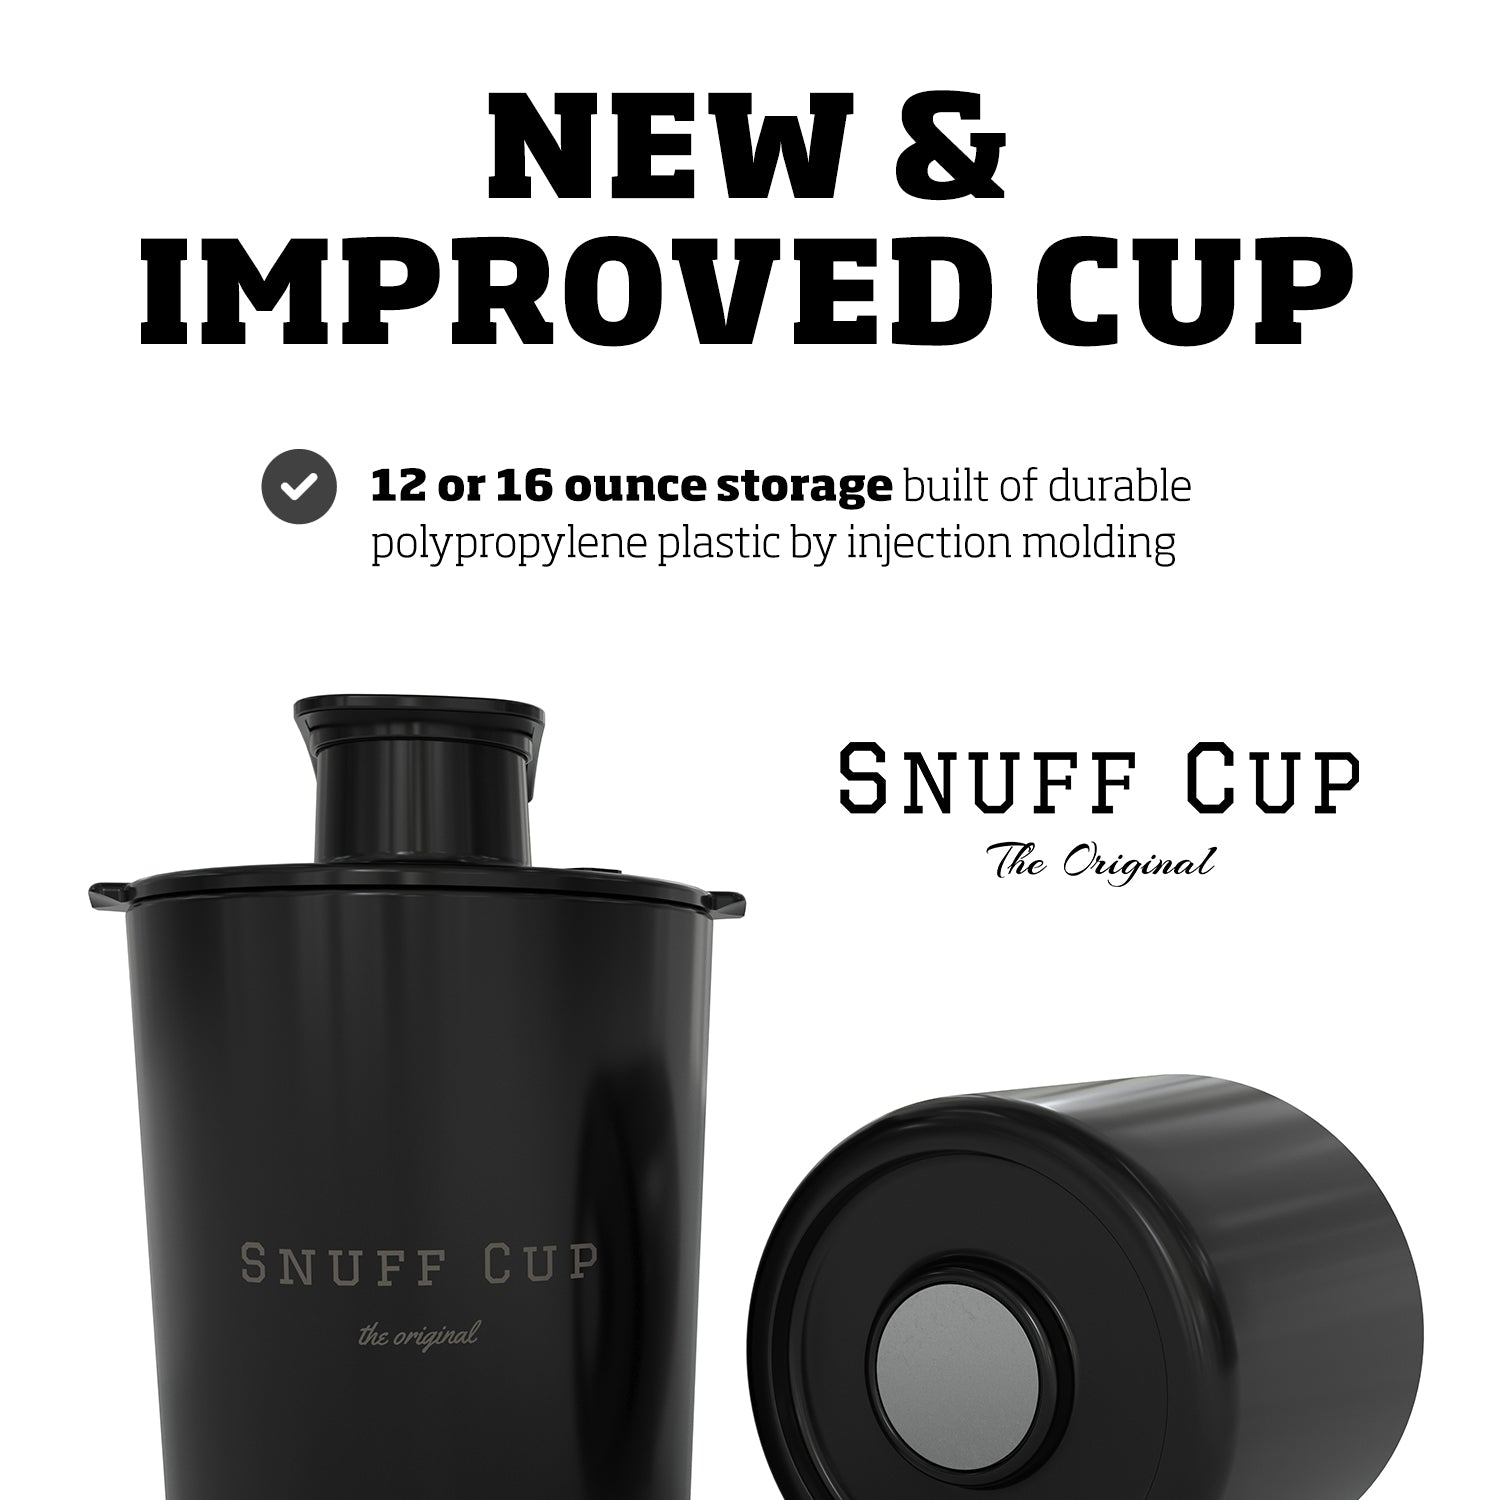 The Snuff Cup Pro™